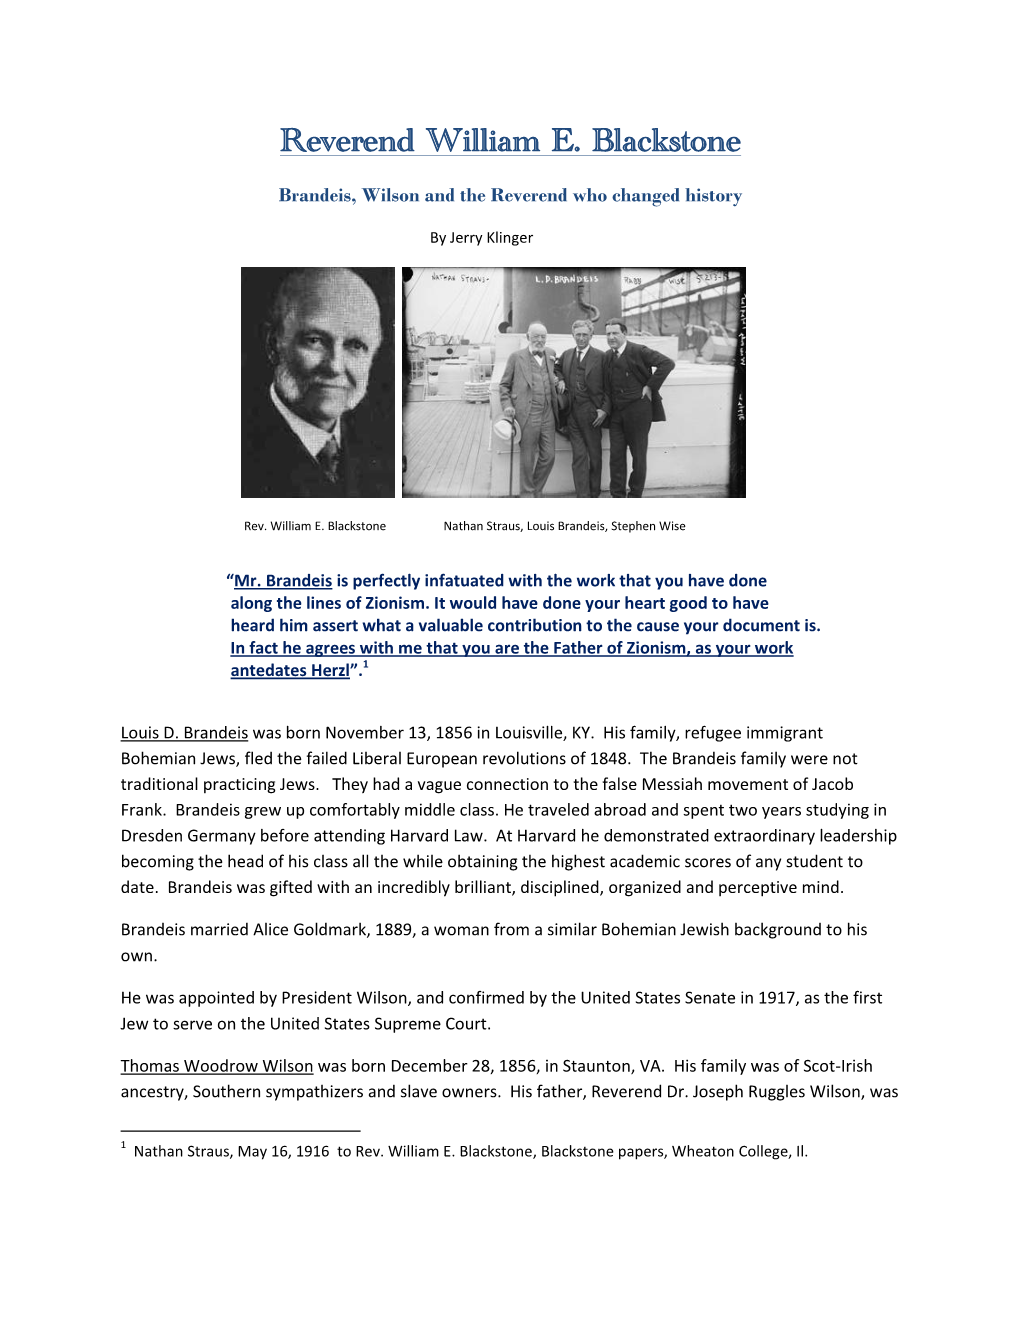 Reverend William E. Blackstone Brandeis, Wilson and the Reverend Who Changed History